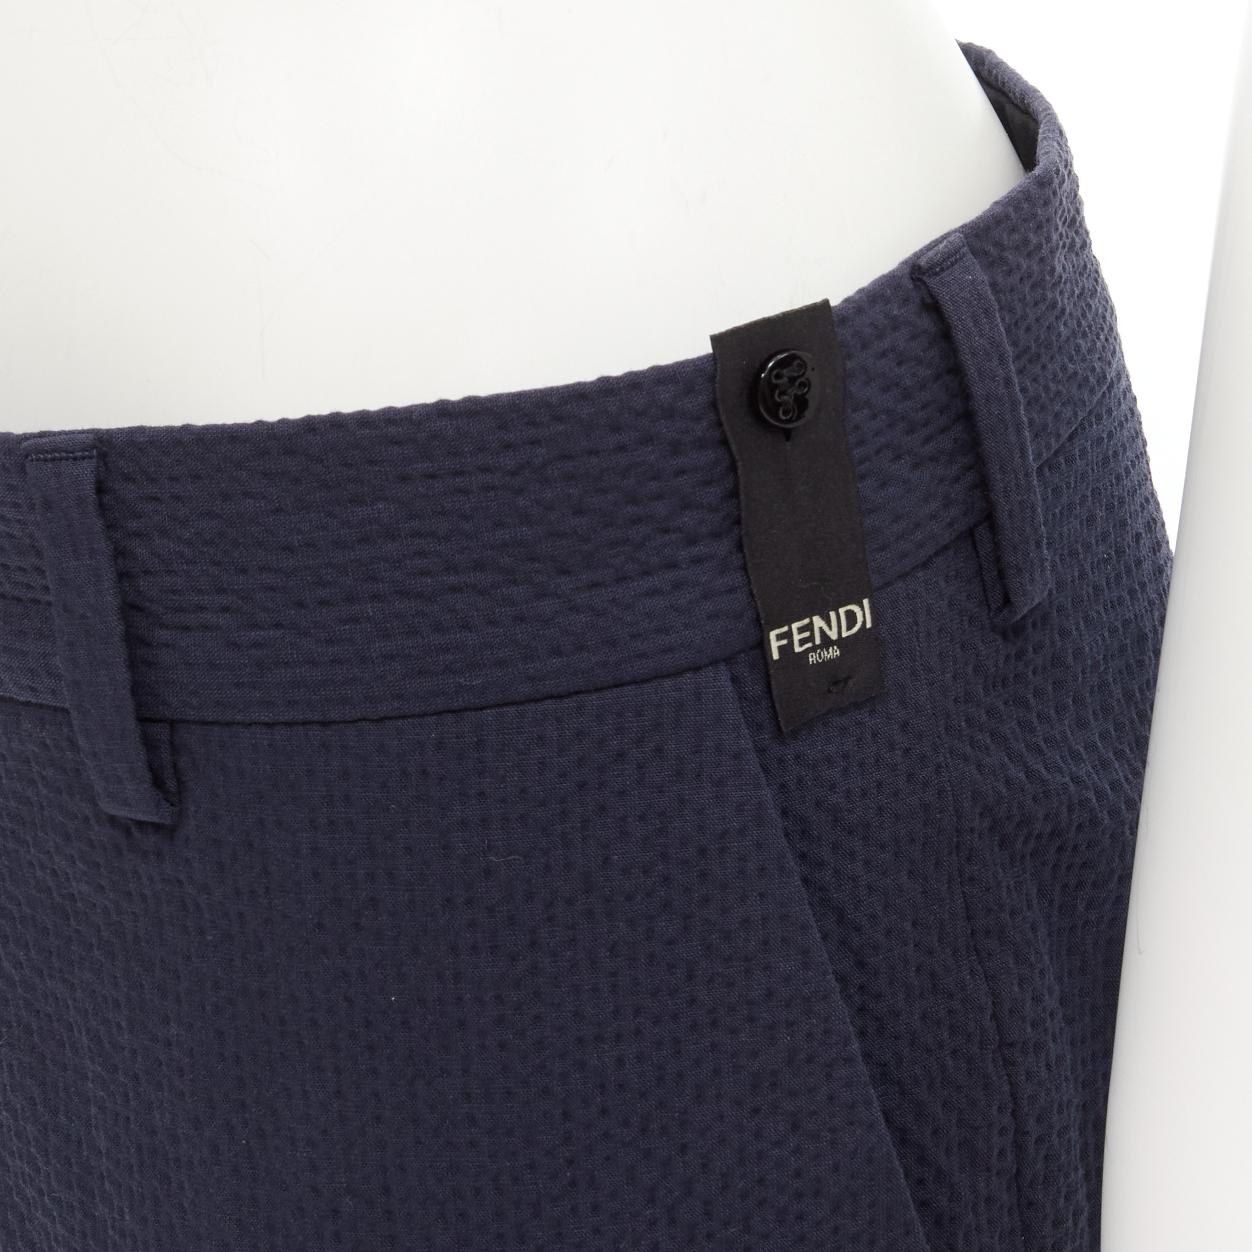 FENDI navy blue seersucker cotton blend trousers pants IT44 XS
Reference: CRTI/A00731
Brand: Fendi
Material: Cotton, Blend
Color: Blue
Pattern: Solid
Closure: Zip
Made in: Italy

CONDITION:
Condition: Excellent, this item was pre-owned and is in